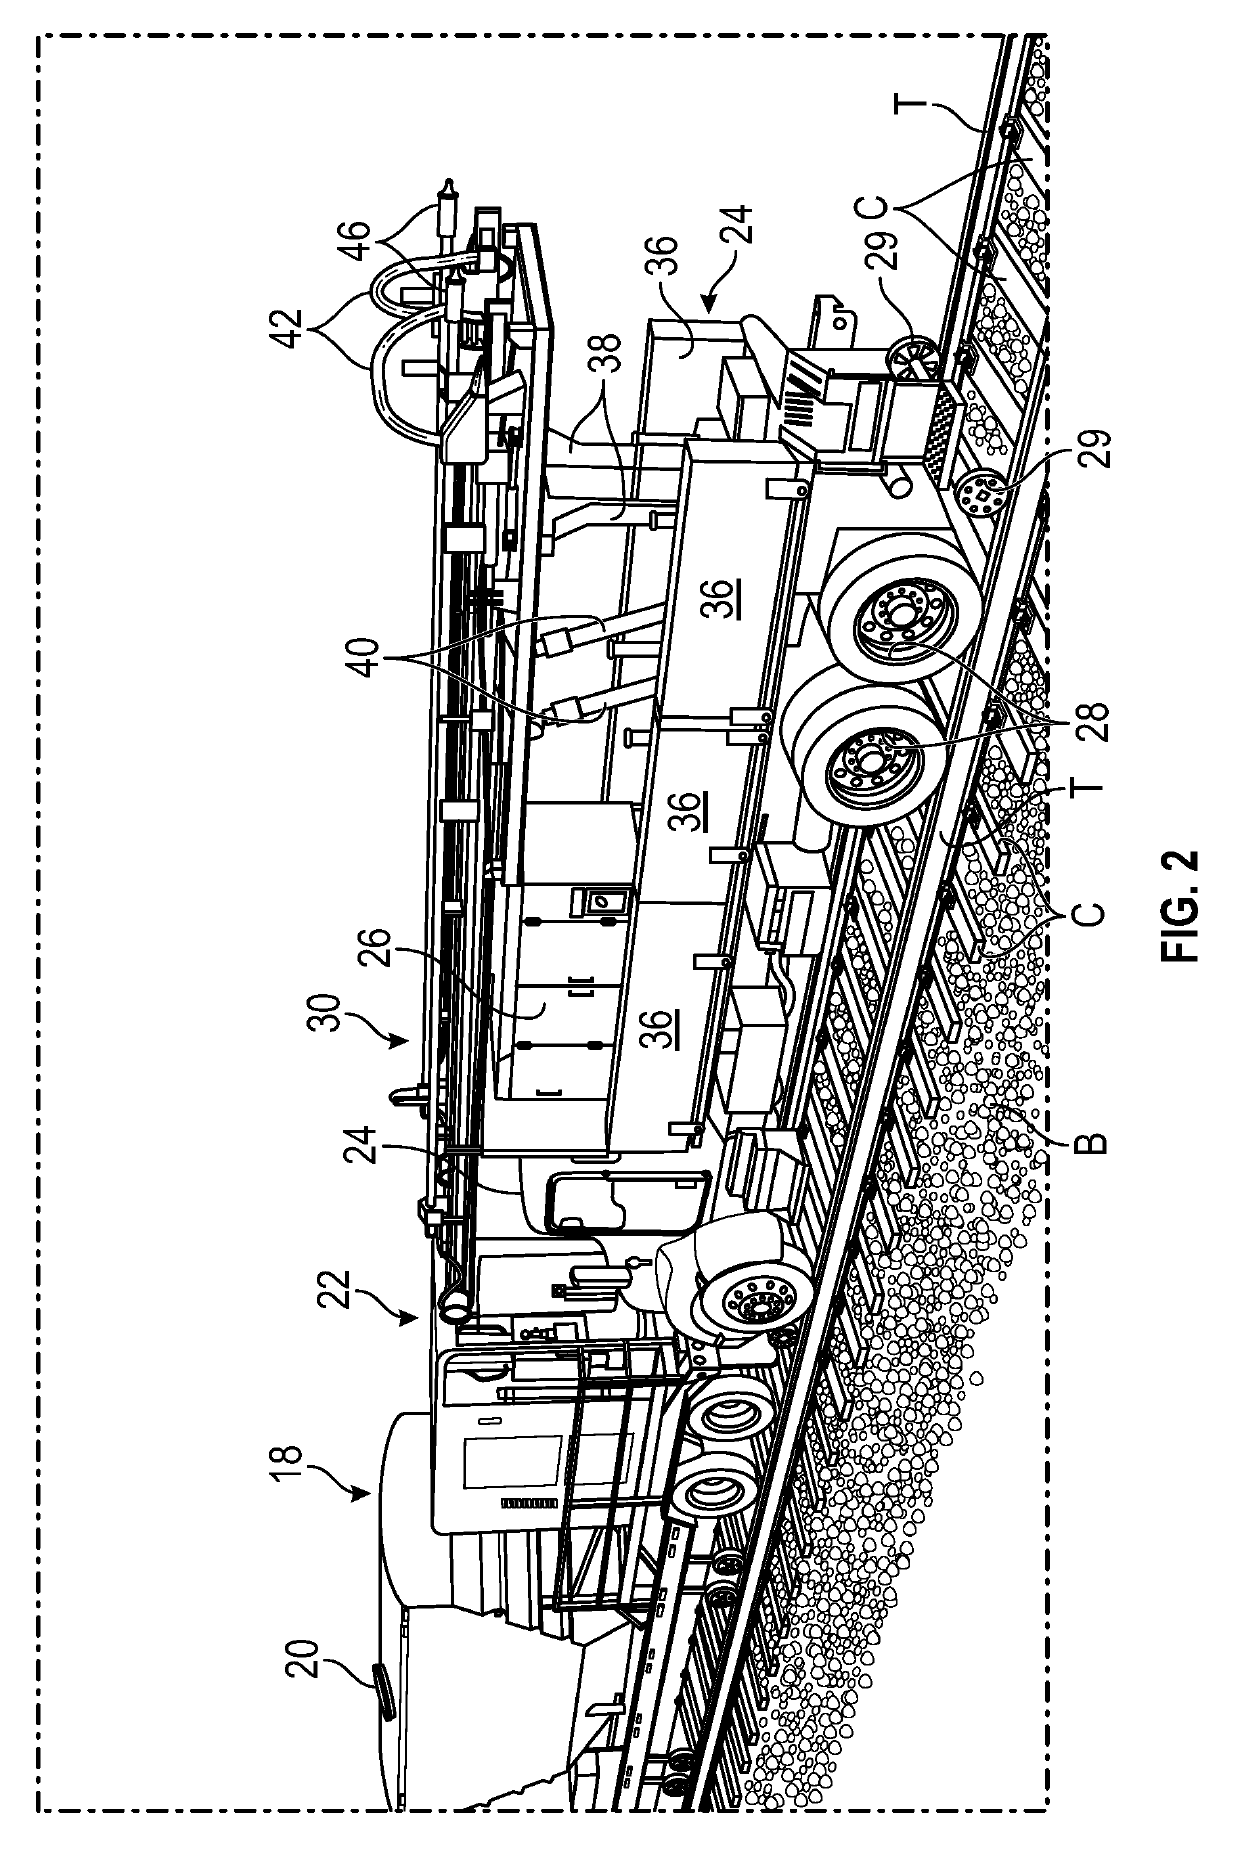 System and Method for Sub-grade Stabilization of Railroad Bed